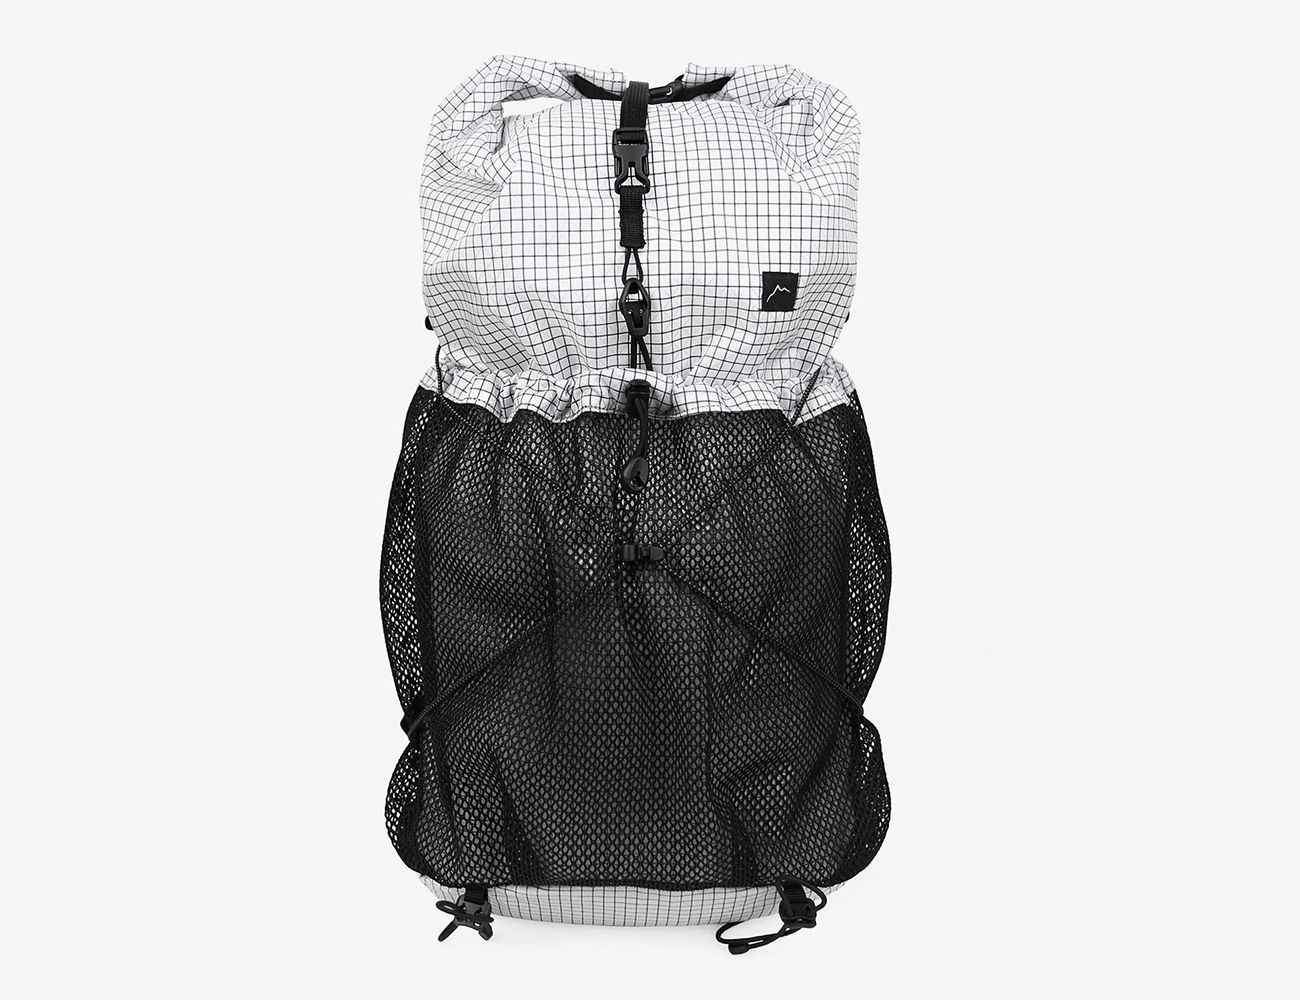 Cayl's Compact Backpacks Are Perfect for Life in the City